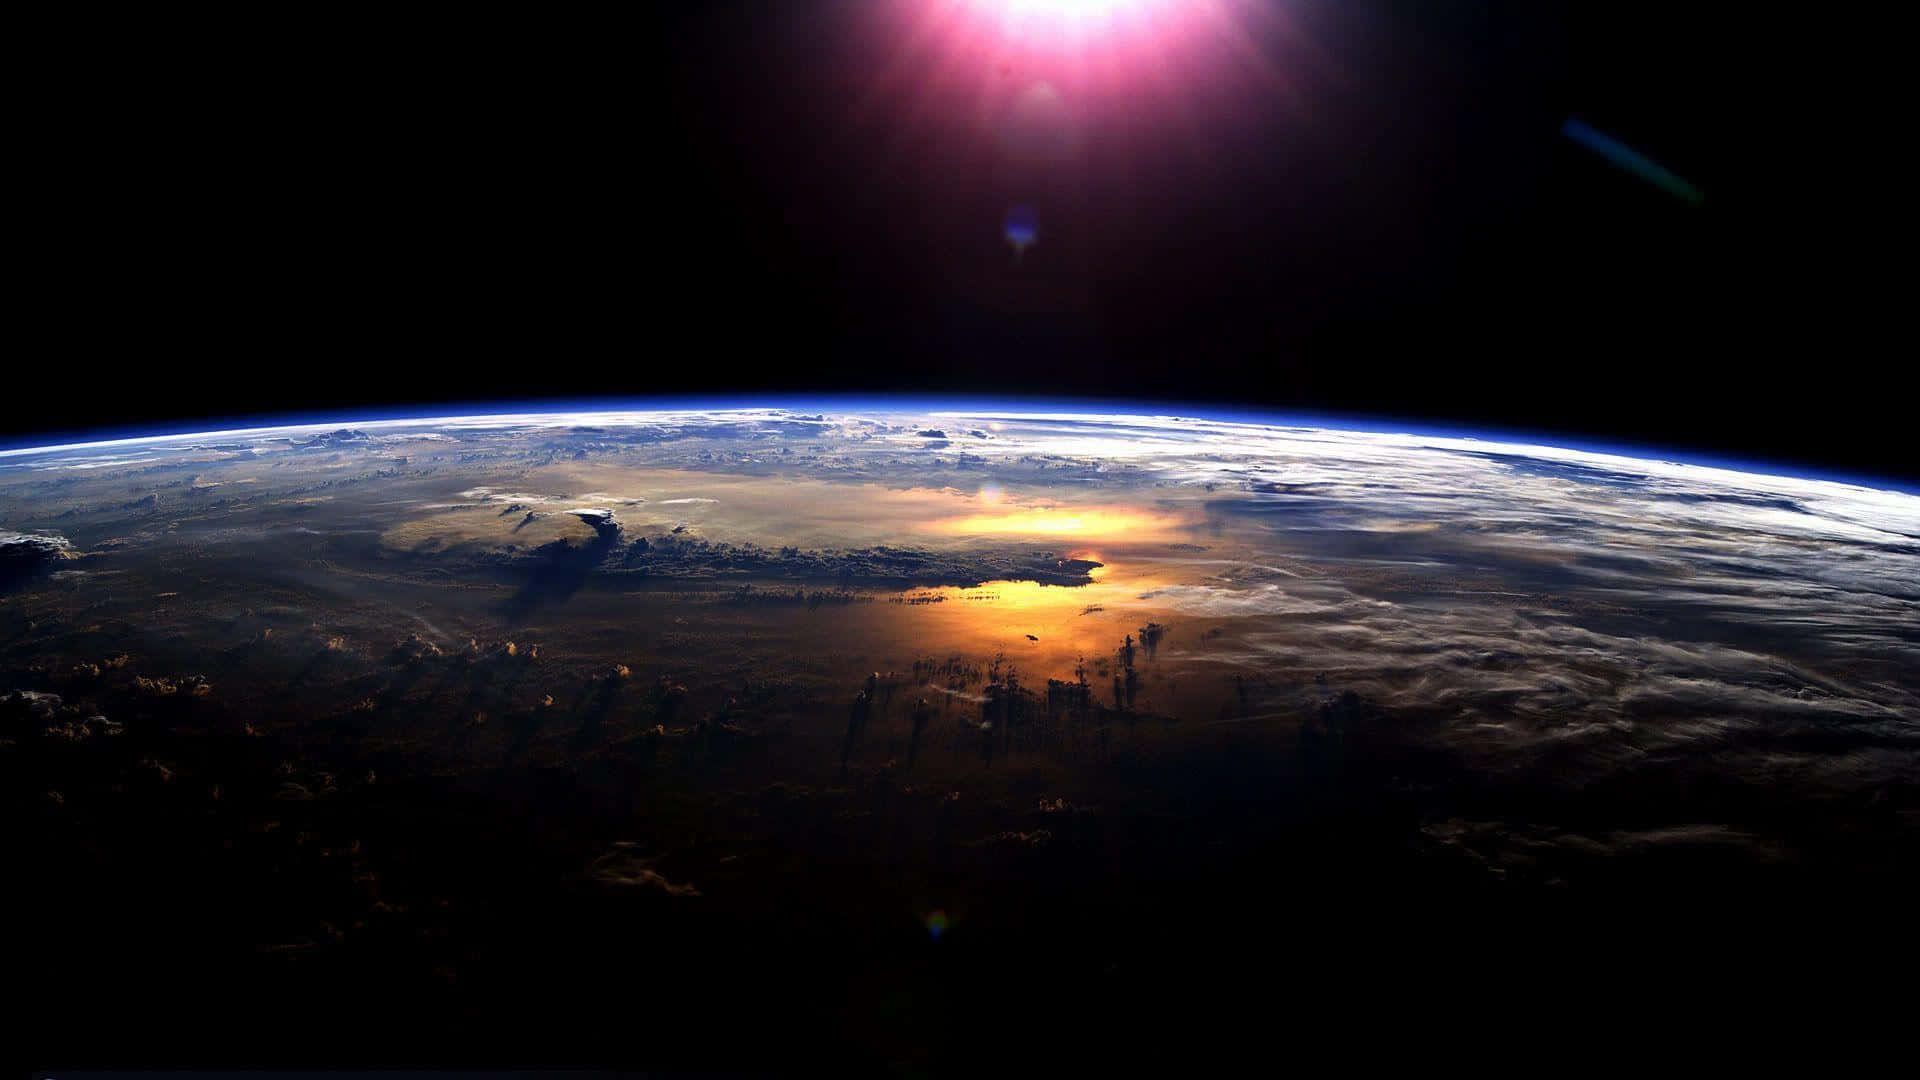 A spectacular view of planet Earth from space Wallpaper